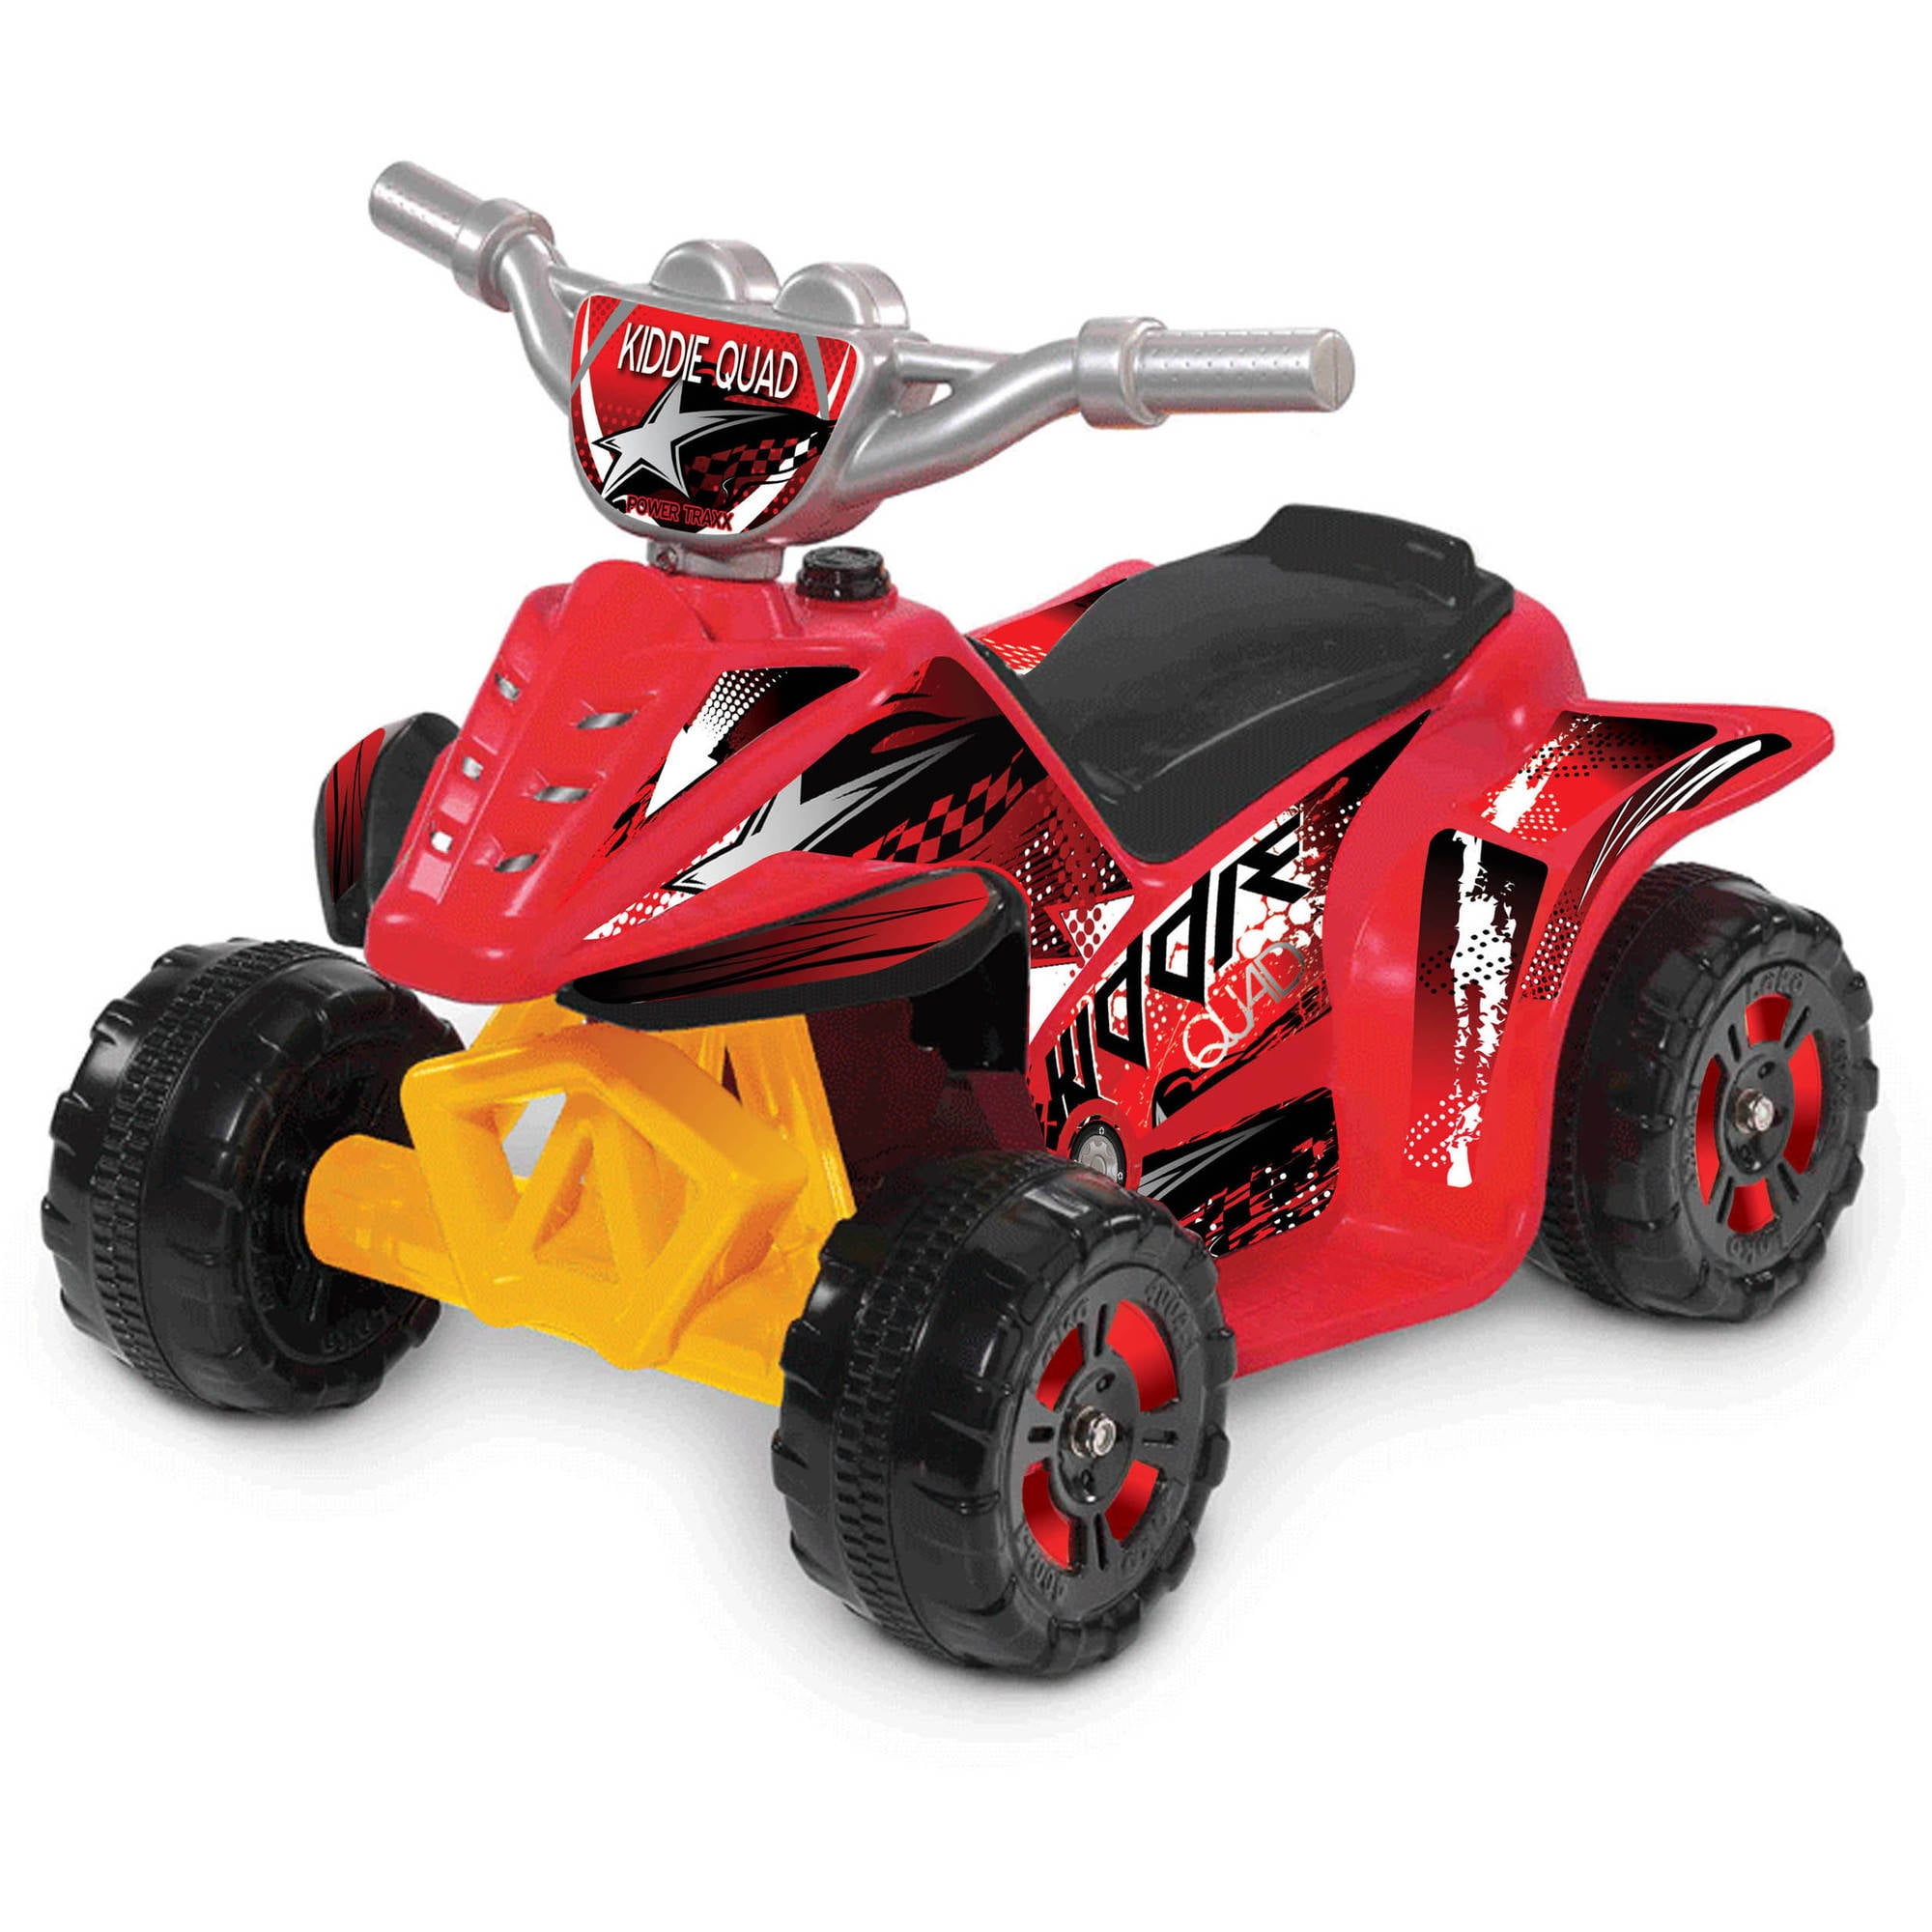 Kid Motorz 0670 6v Xtreme Quad Battery-powered Ride-on Red for sale online 